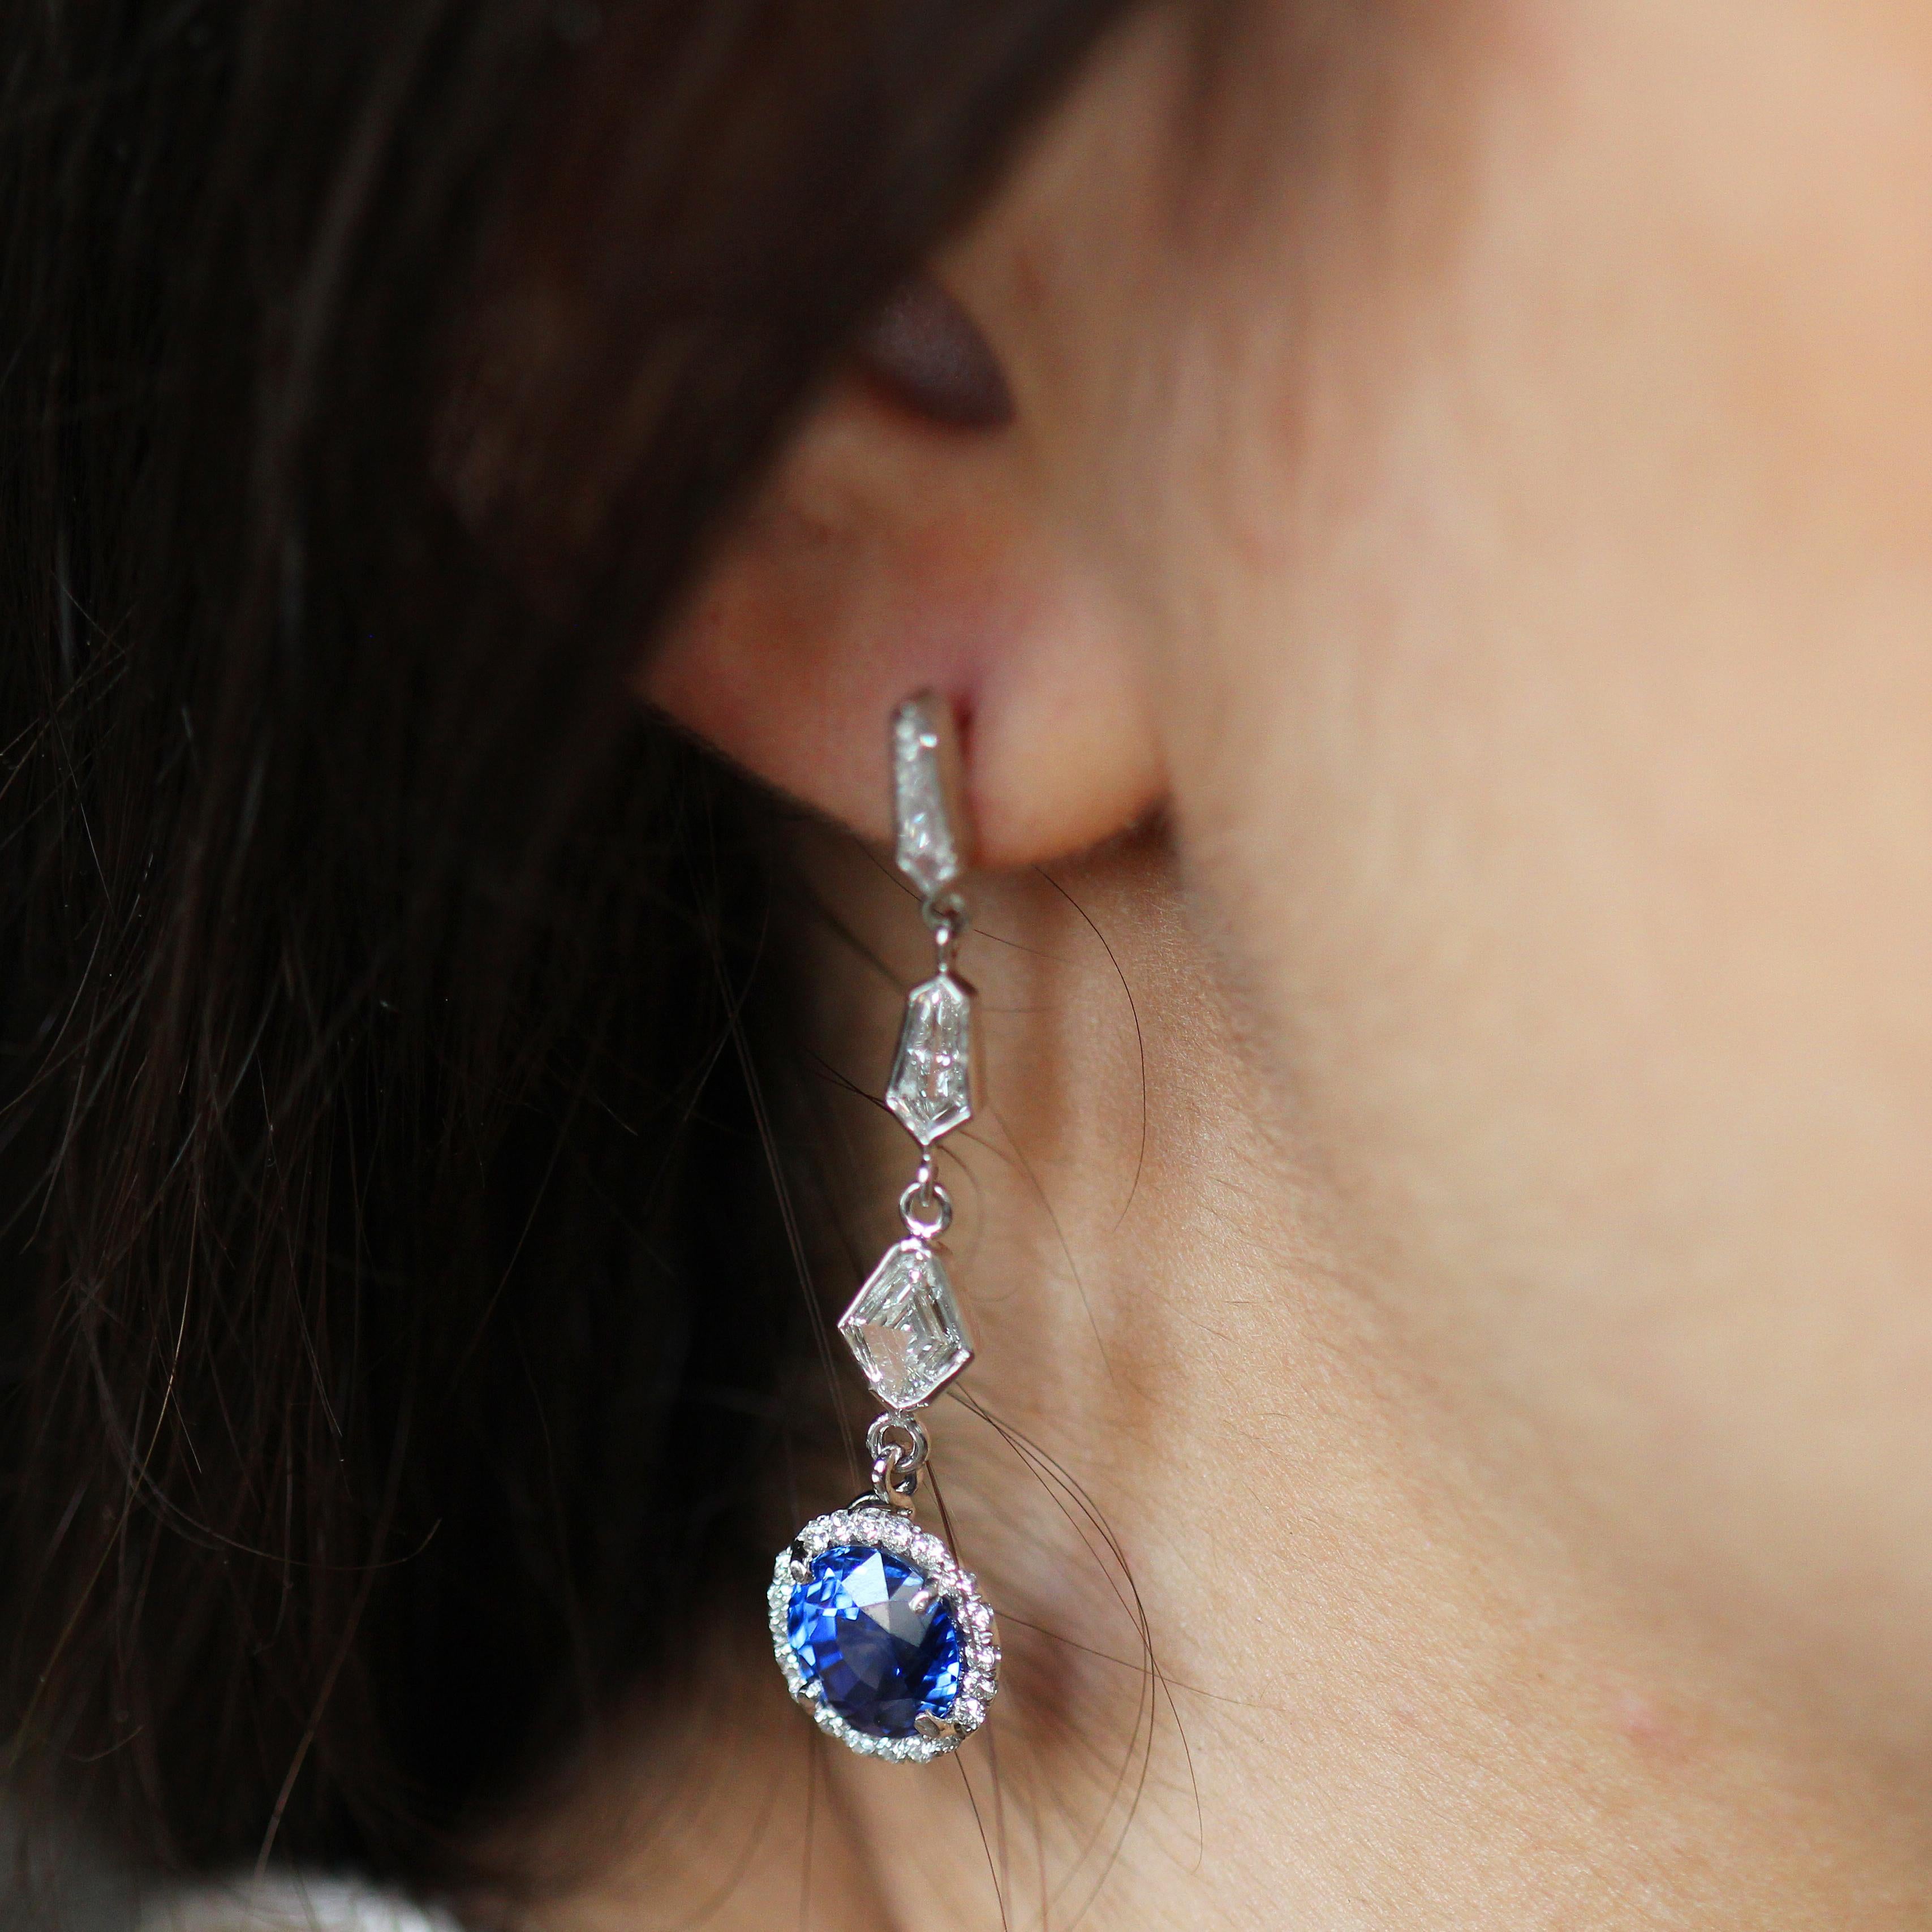 Contemporary 8 Carat TW Vivid Electric Blue Natural No Heat Sapphire Earrings For Sale